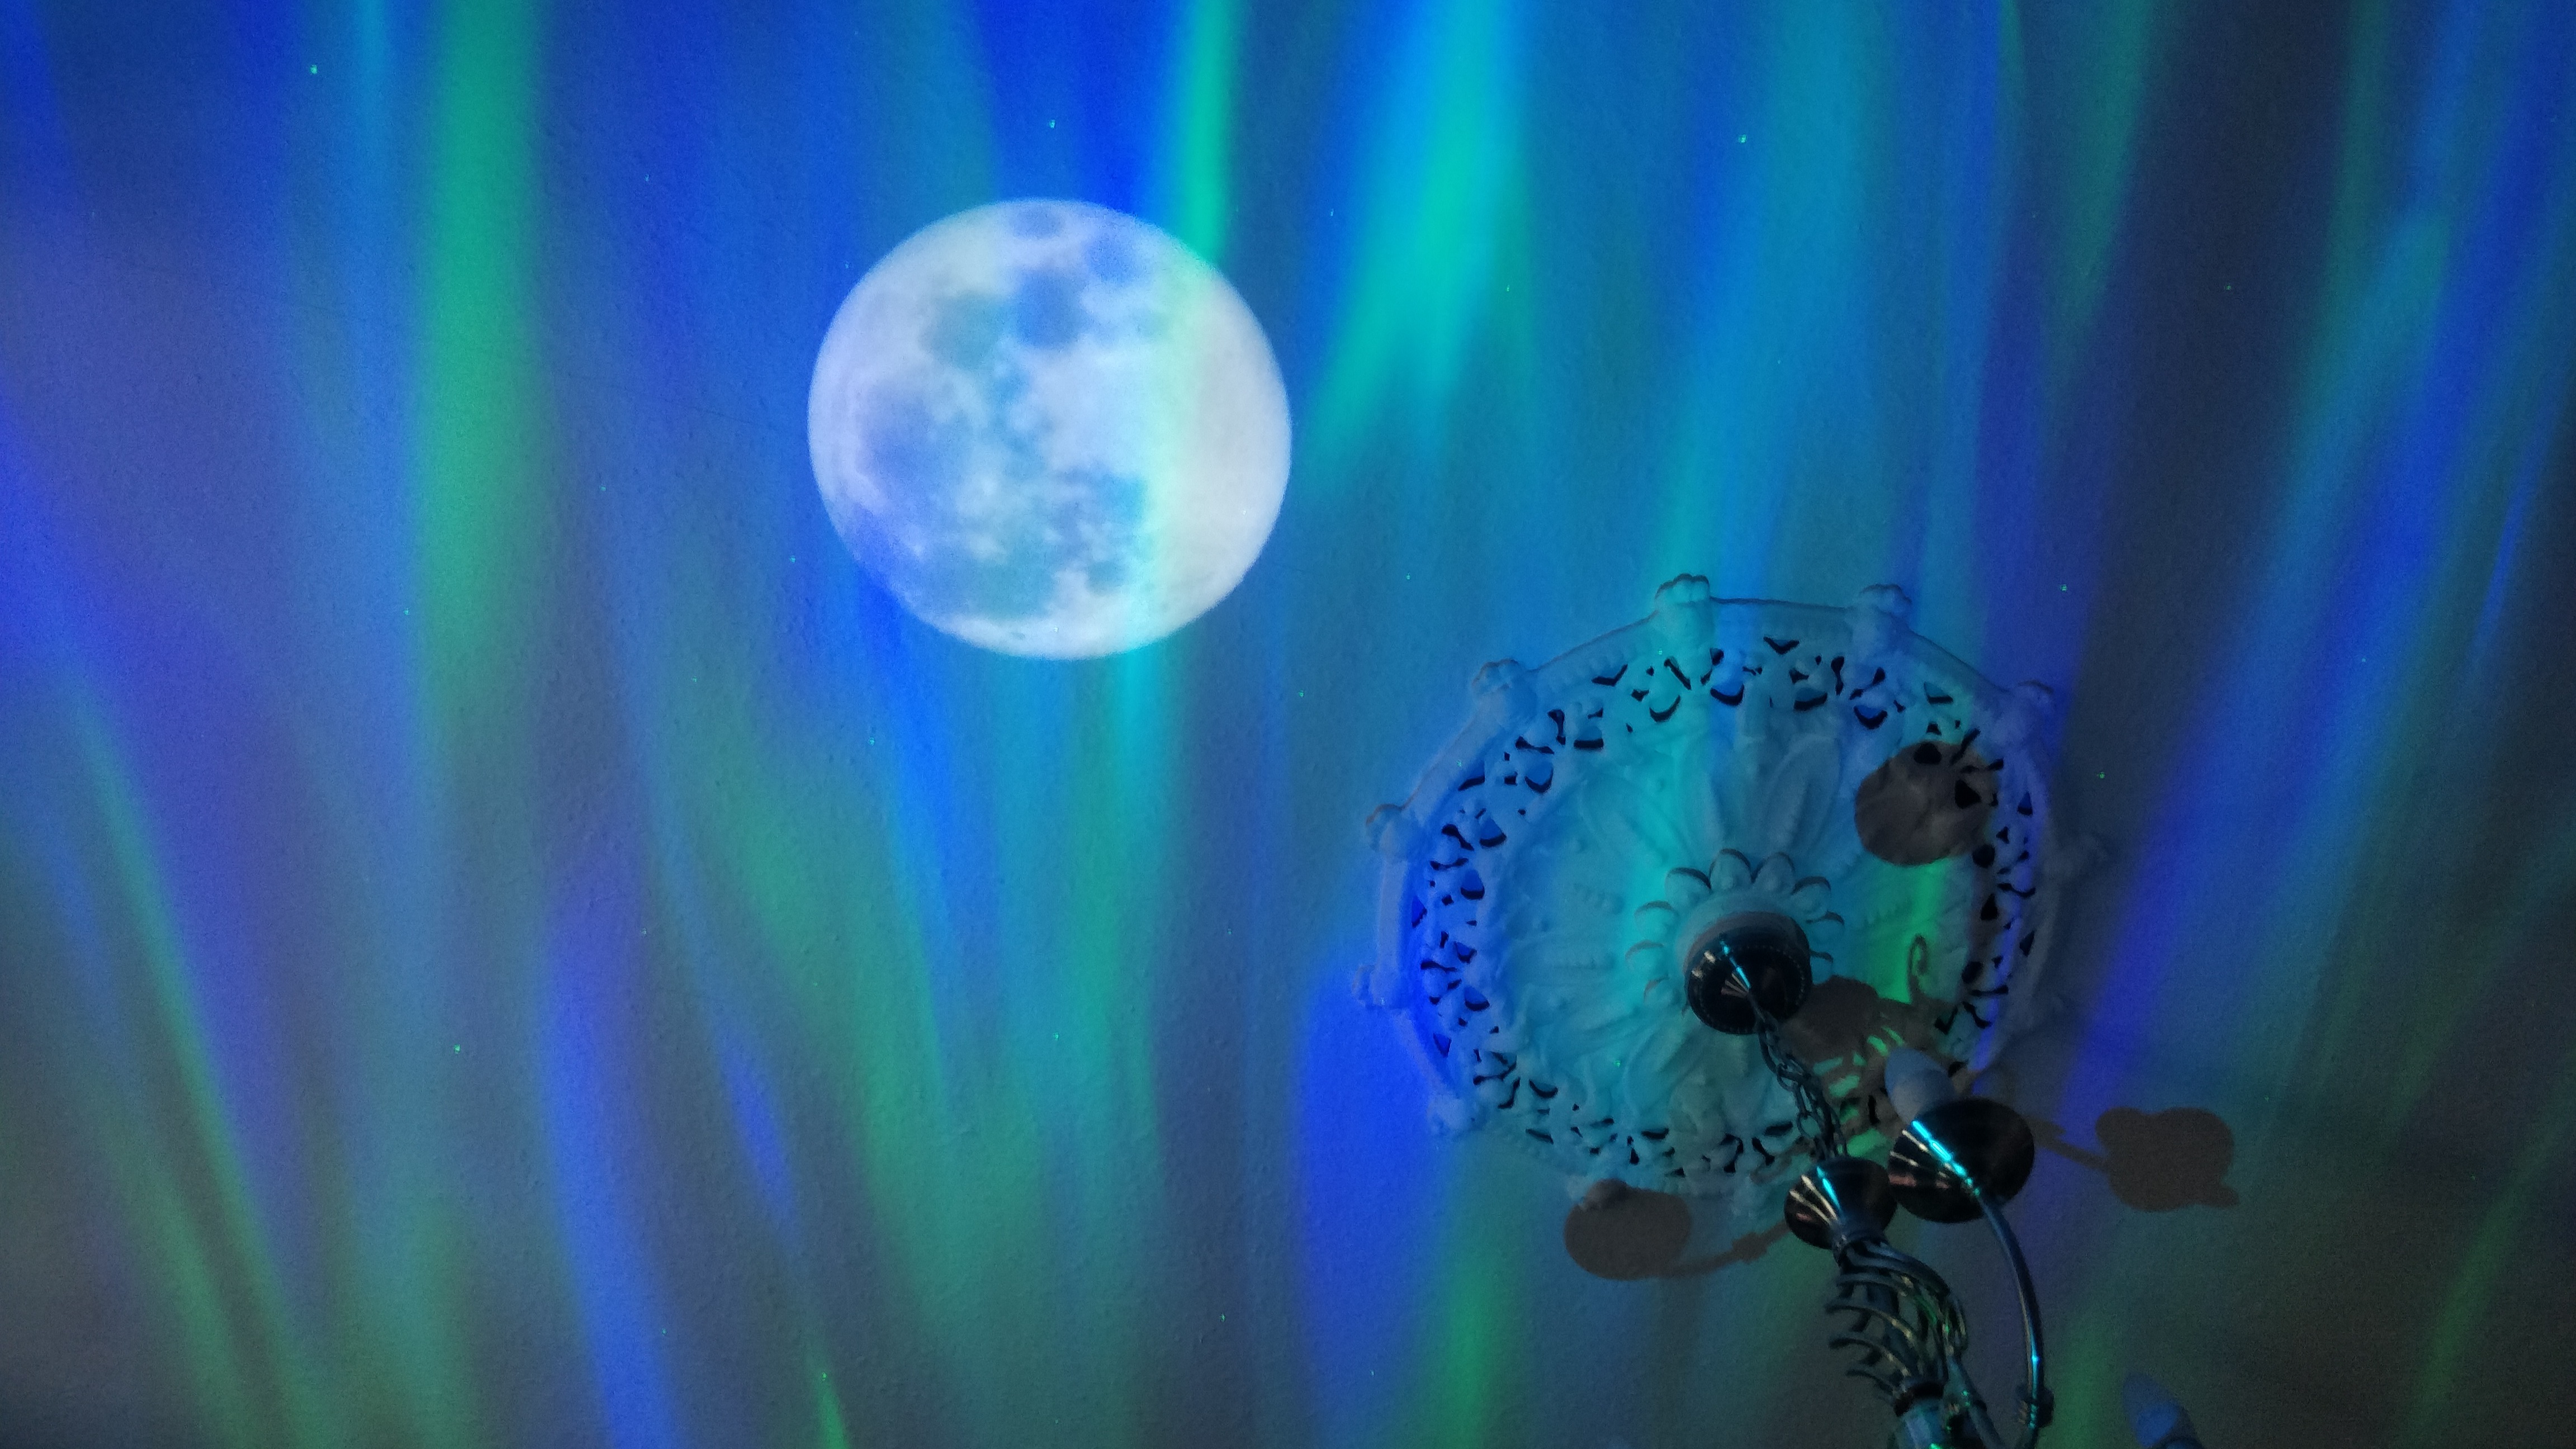 Encalife's Aurora Borealis Northern Lights Star Projector in action on the ceiling